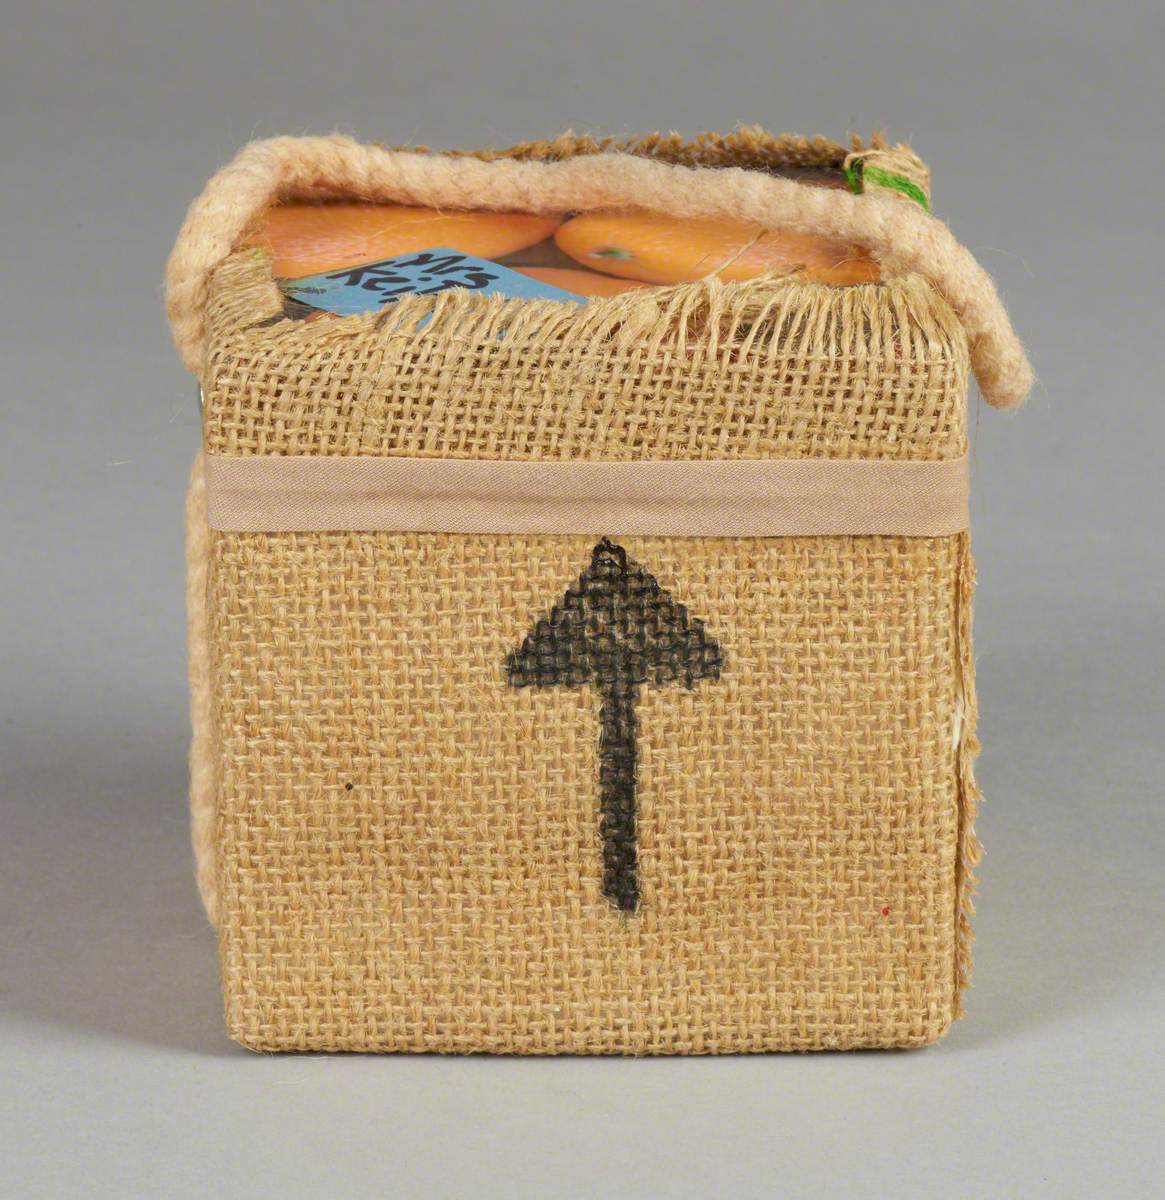 121 Linked Cubes: Cube wrapped in Jute with the Top Showing an Image of Oranges